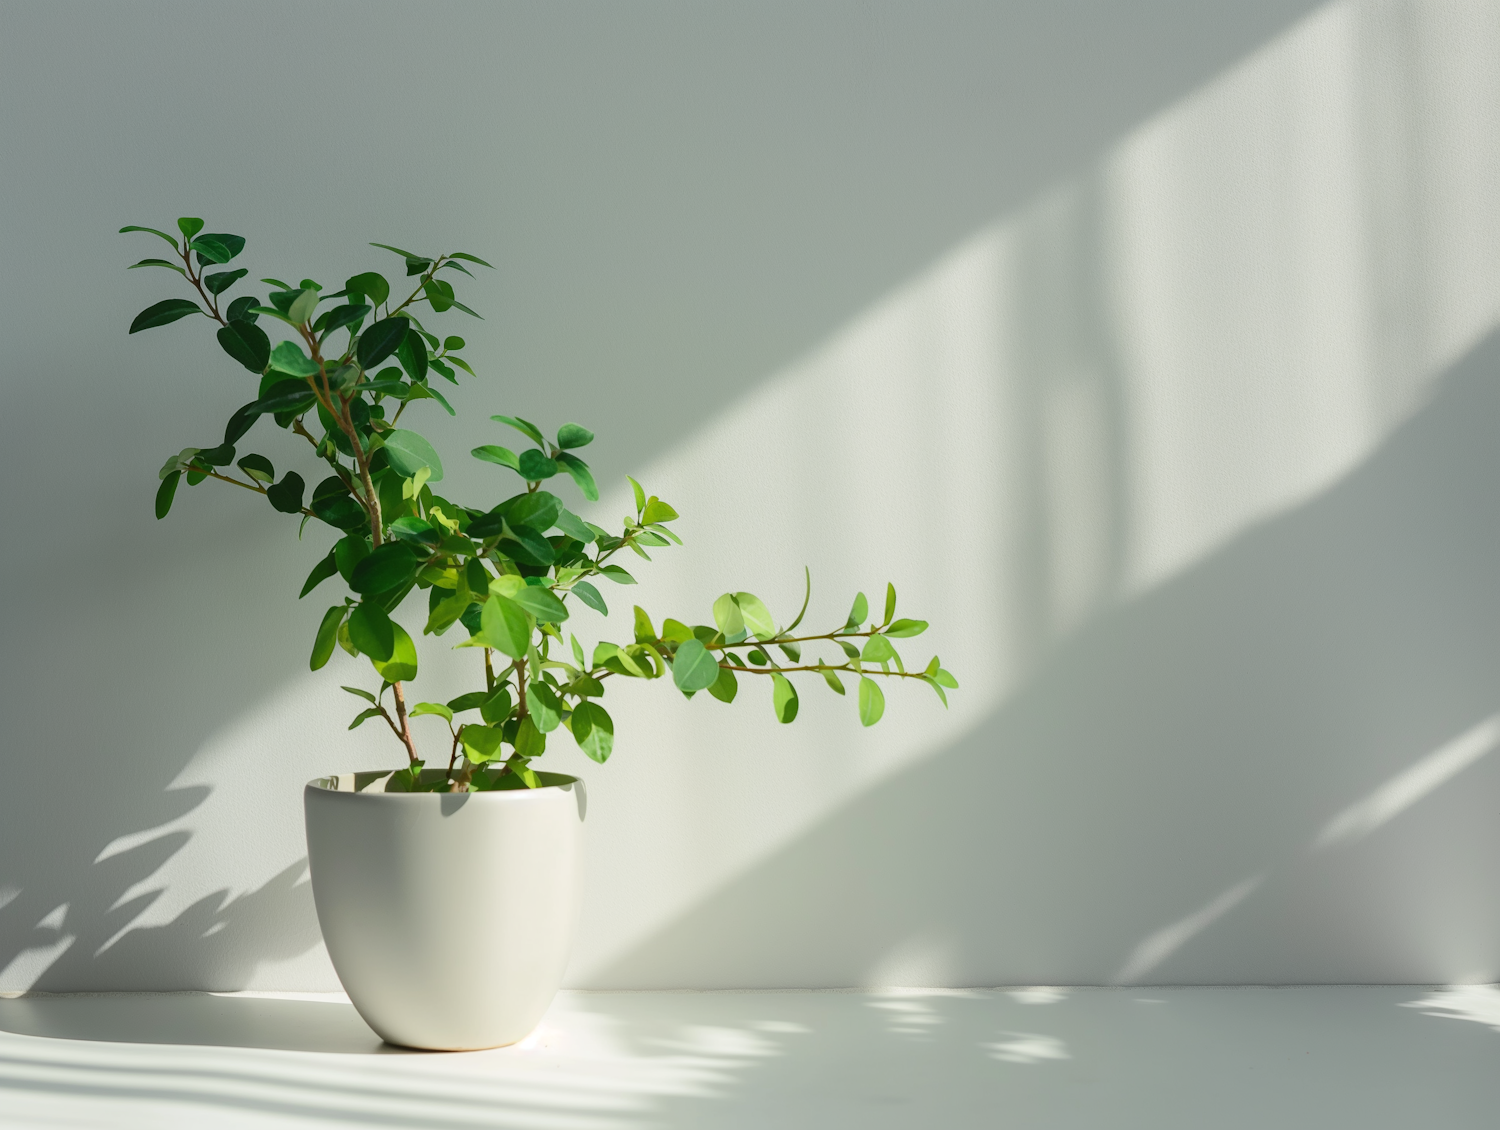 Elegant Potted Plant with Light and Shadow Interplay